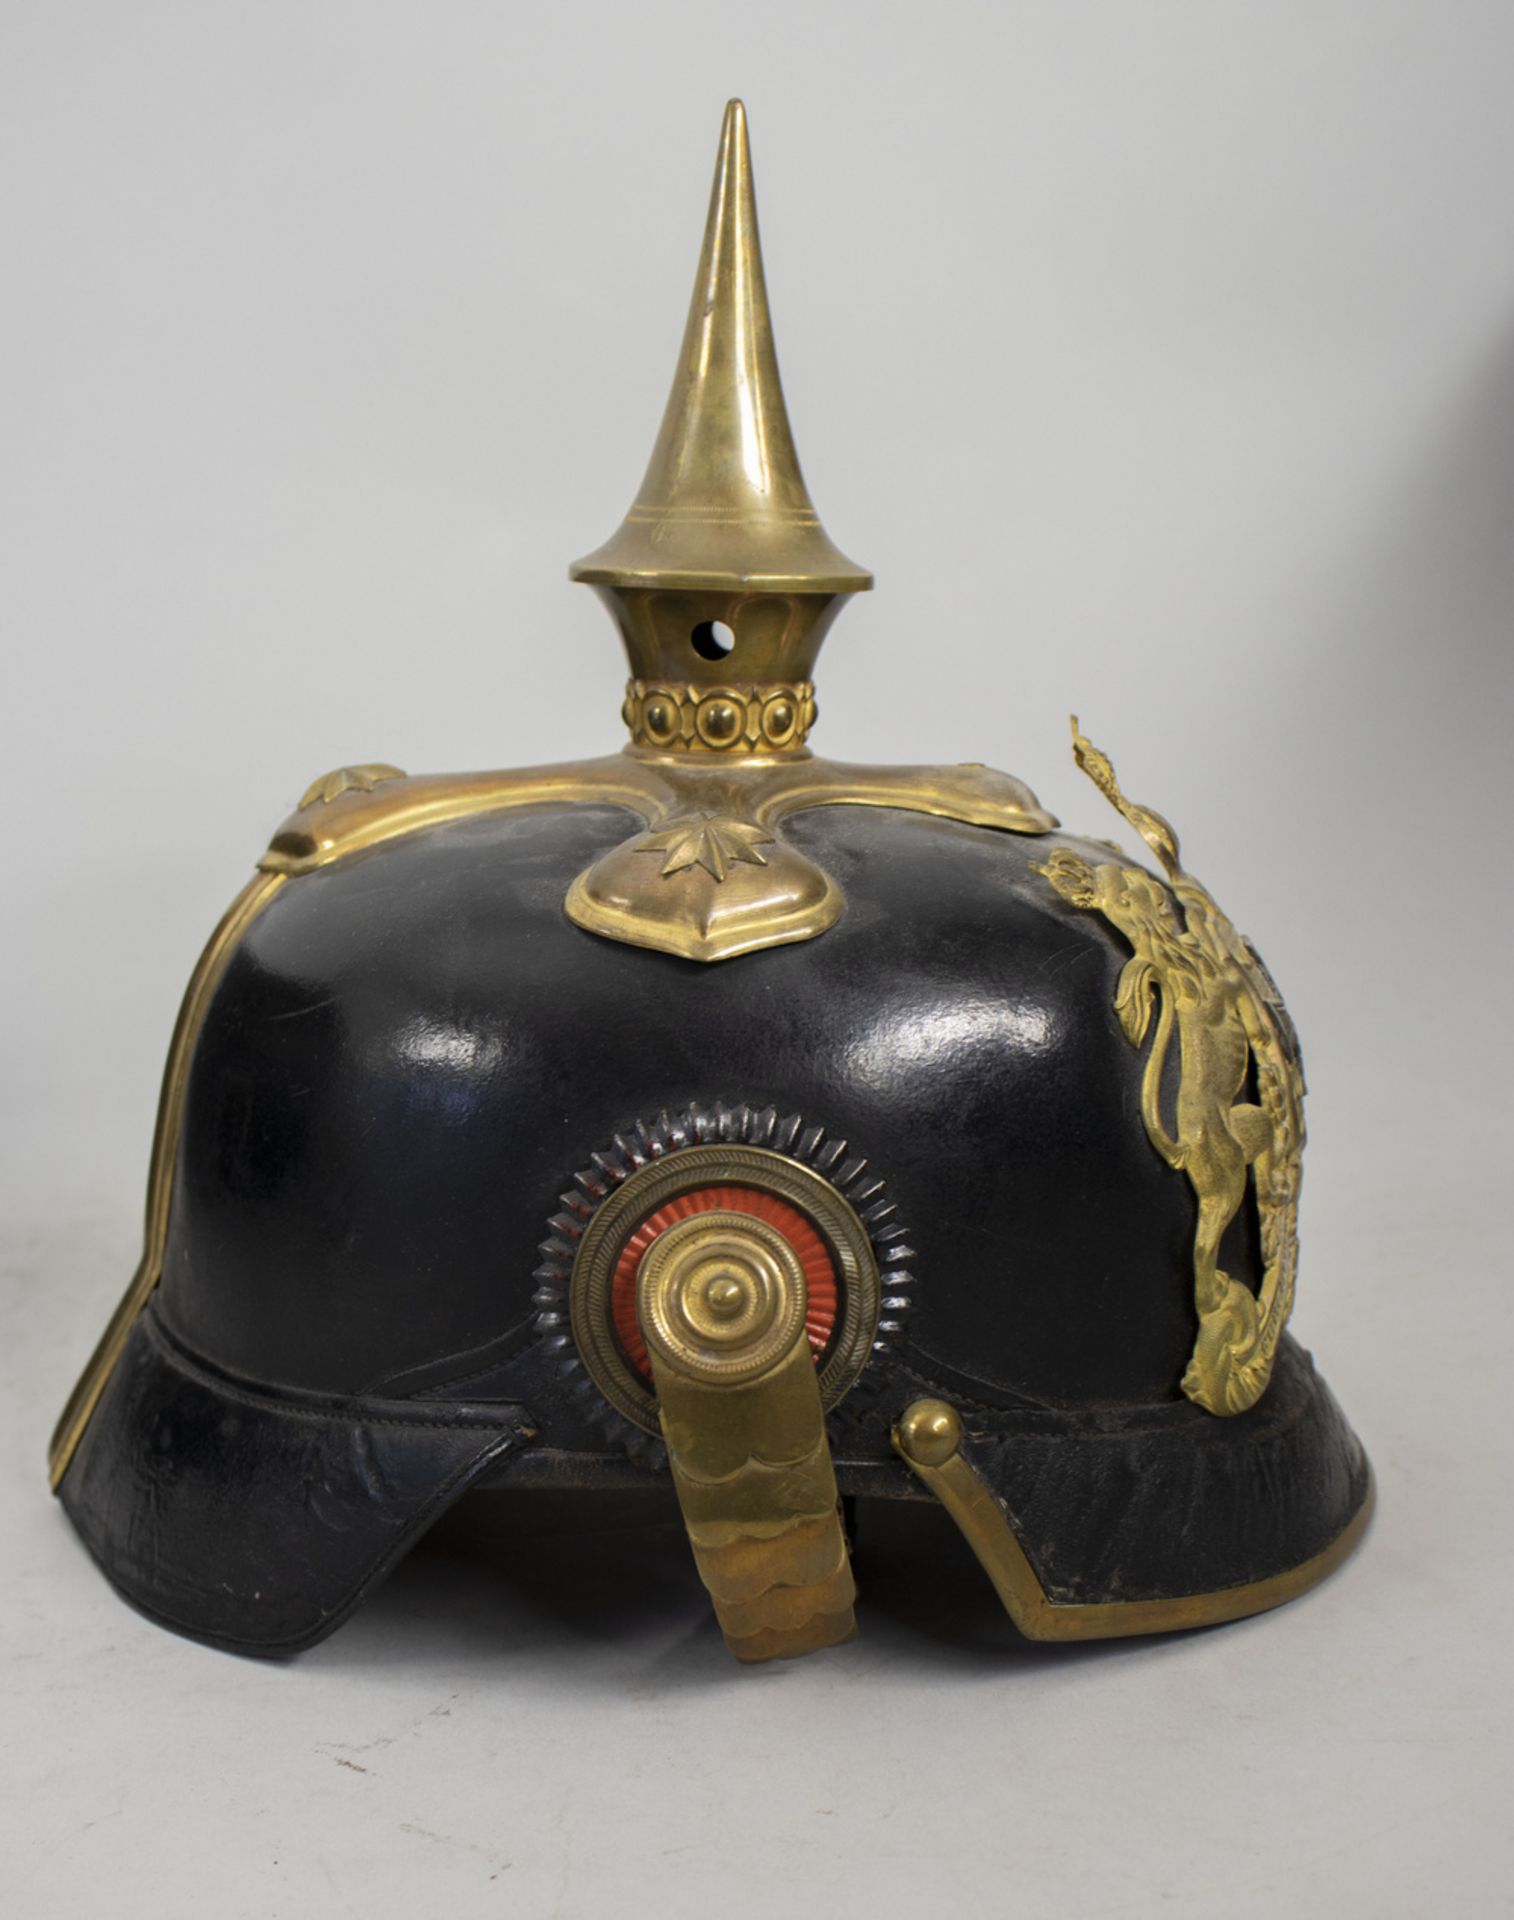 Pickelhaube mit Lederkoffer / A spiked helmet with leather box, Württemberg, um 1910 - Image 6 of 7